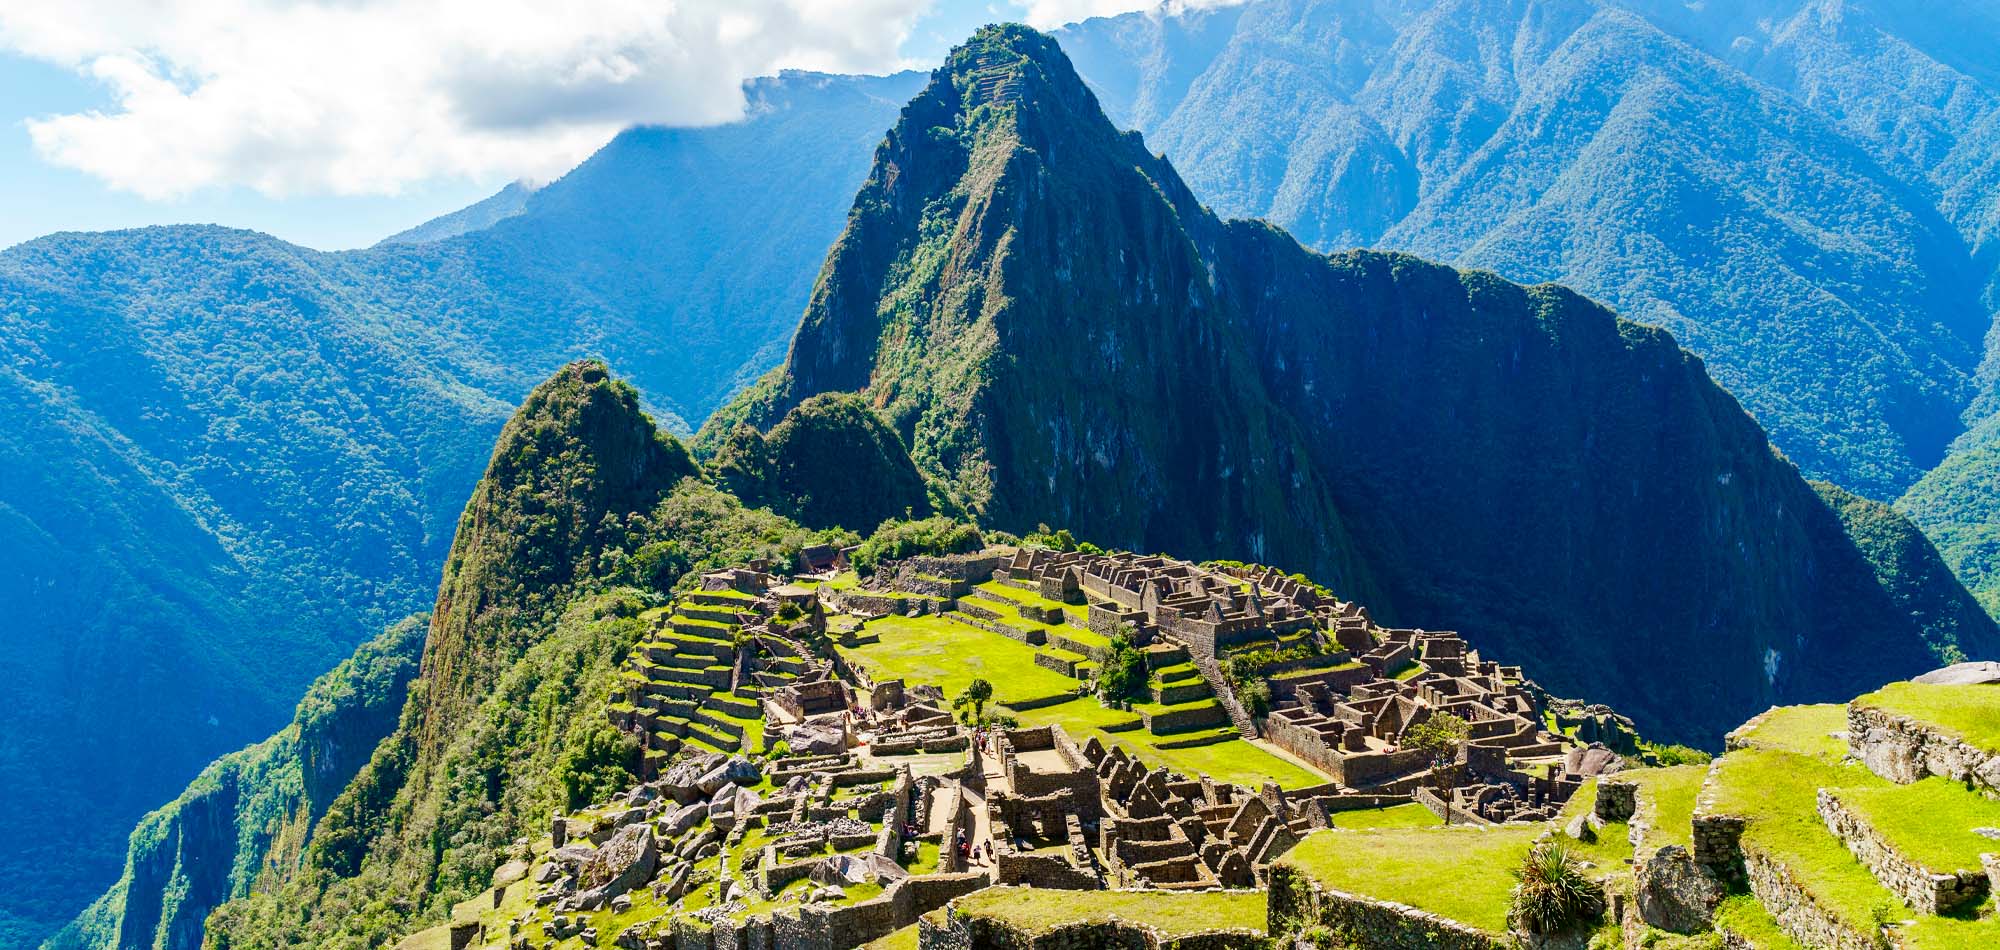 Machu Picchu Tour Full Day with Expedition Train - Incatrailhikeperu